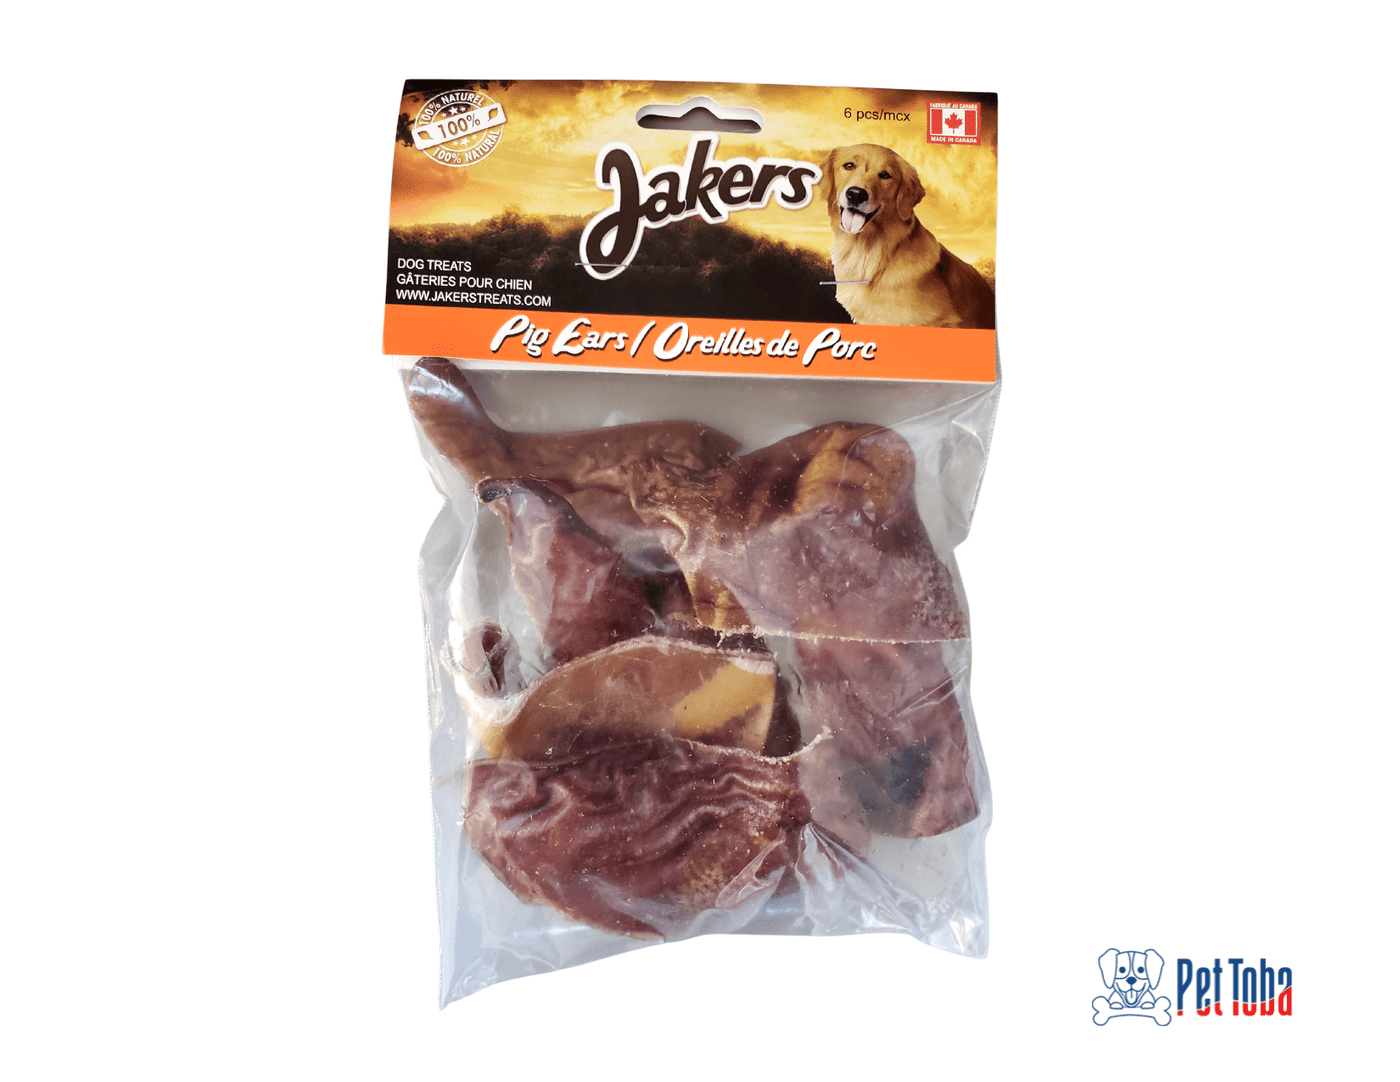 Jakers Packaged Pig Ears - 6pcs